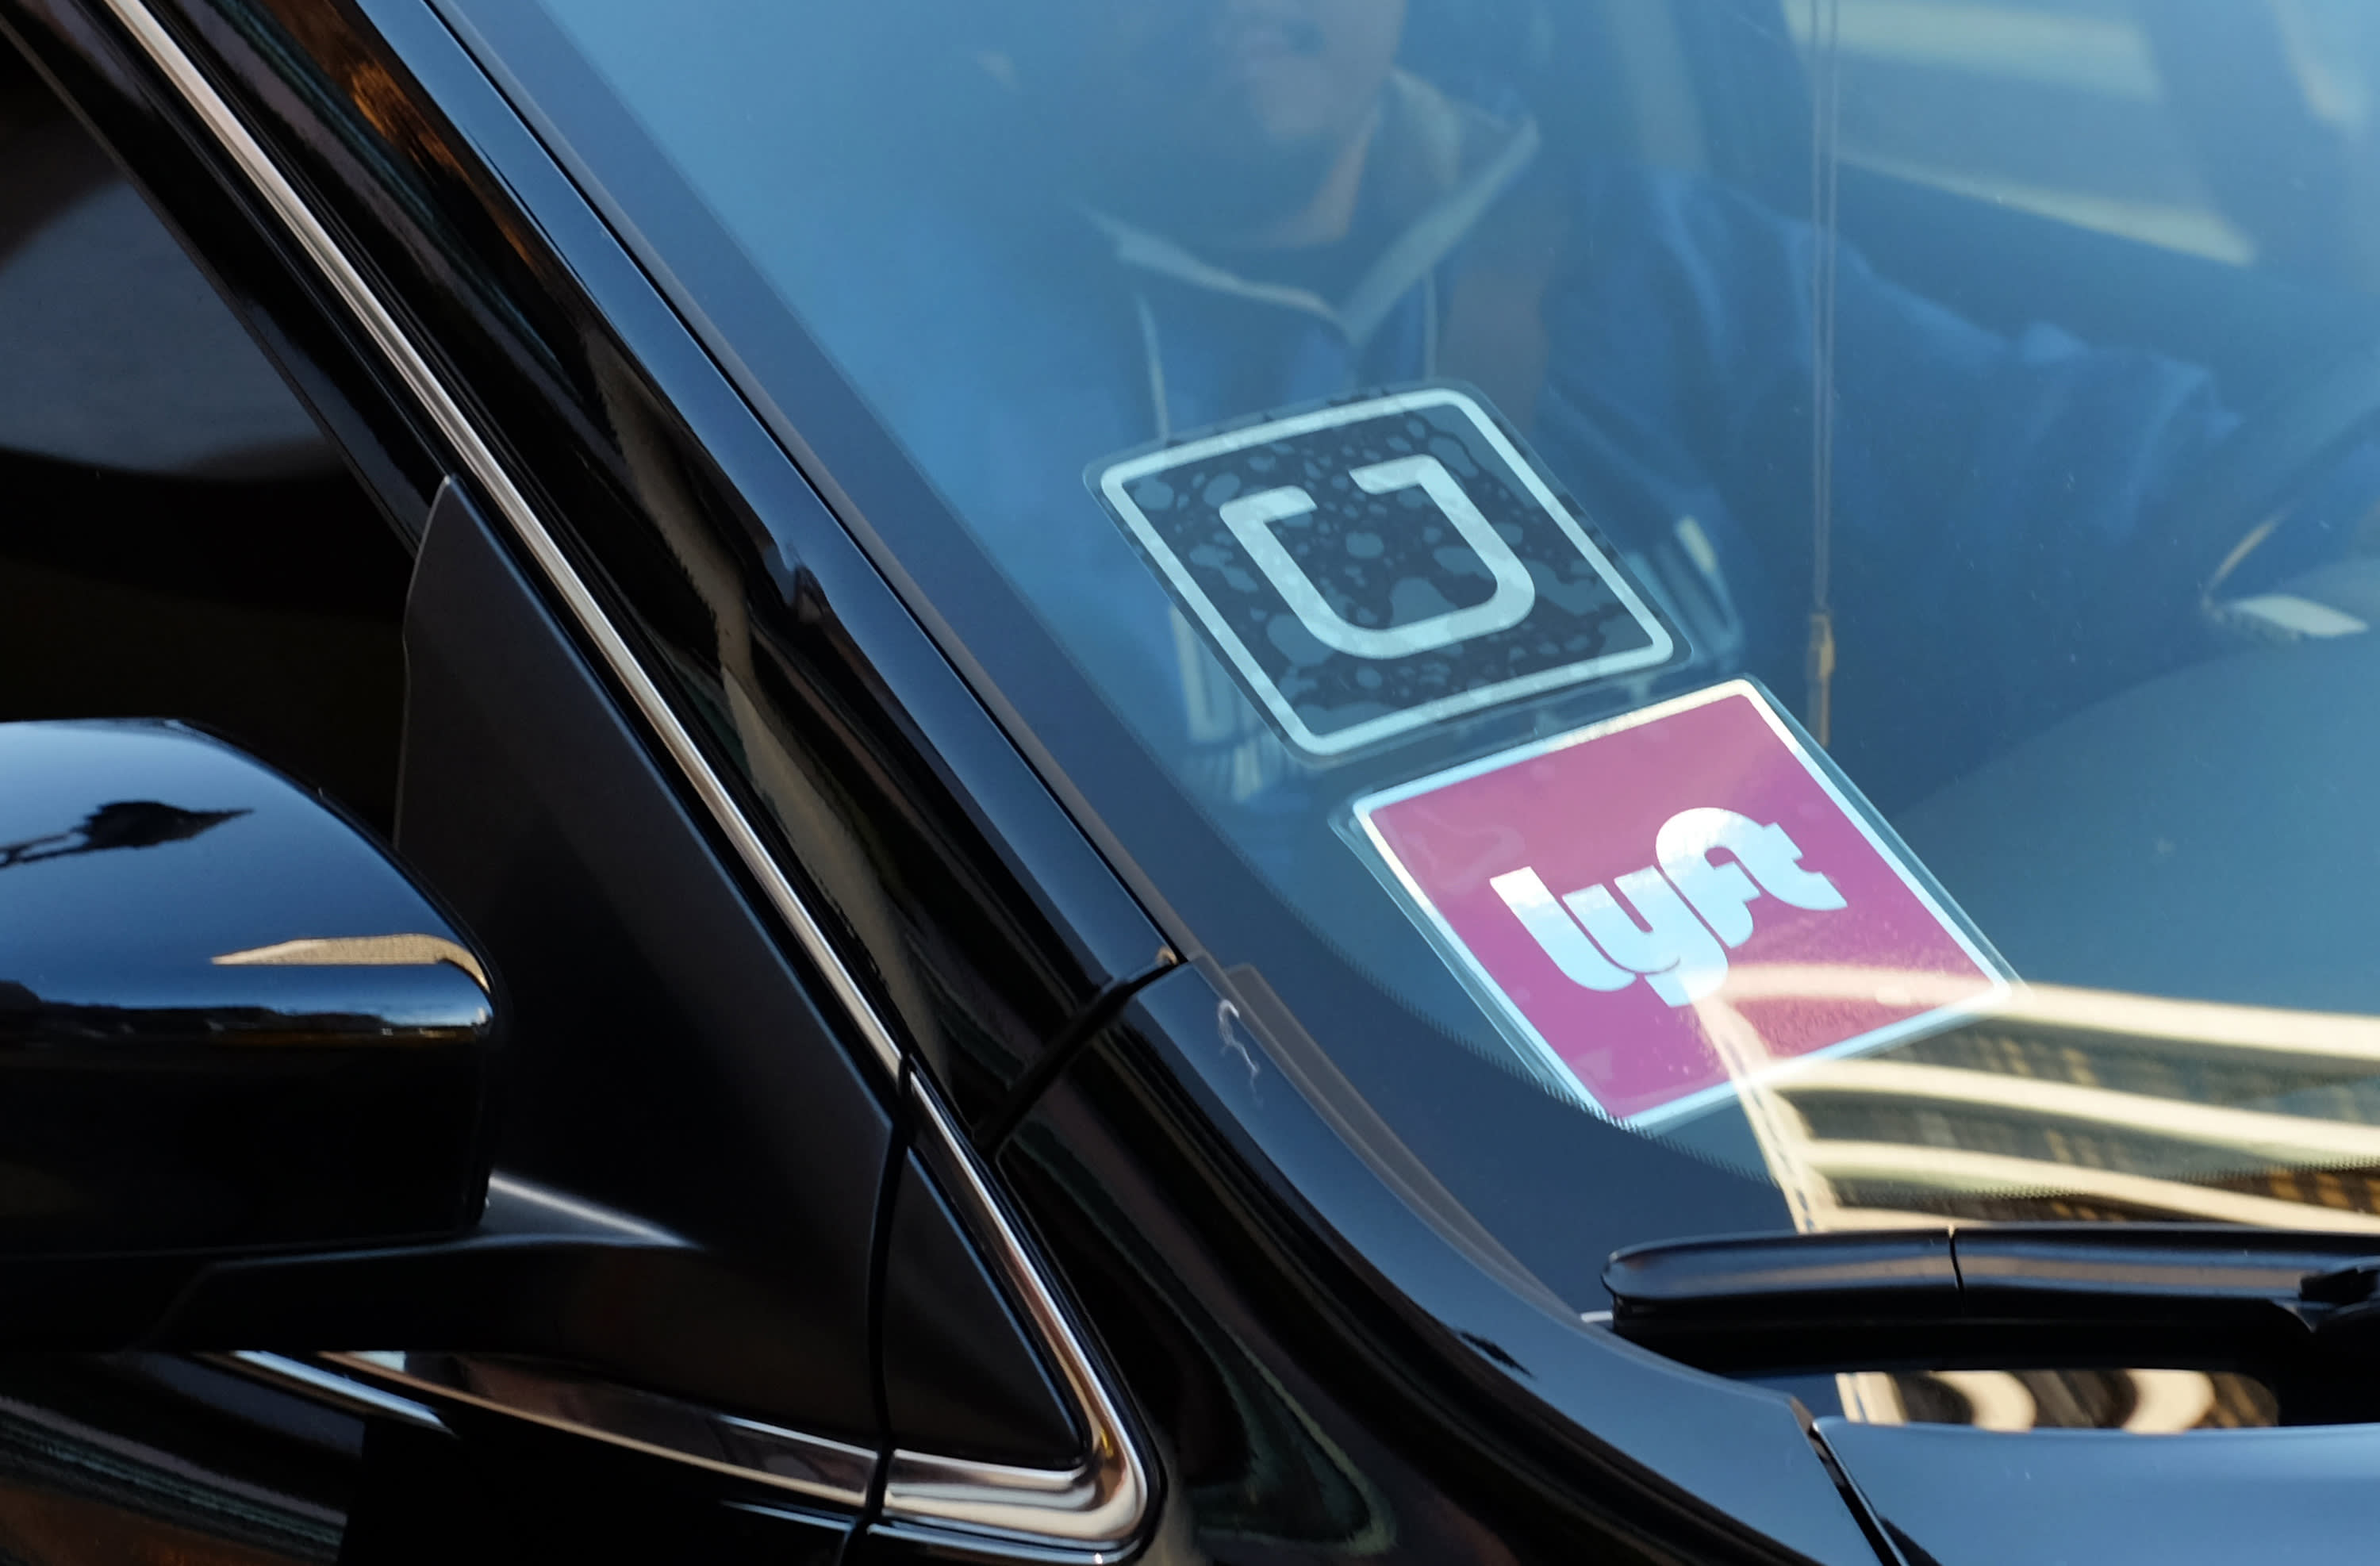 Over 30% upside to ride-sharing stocks